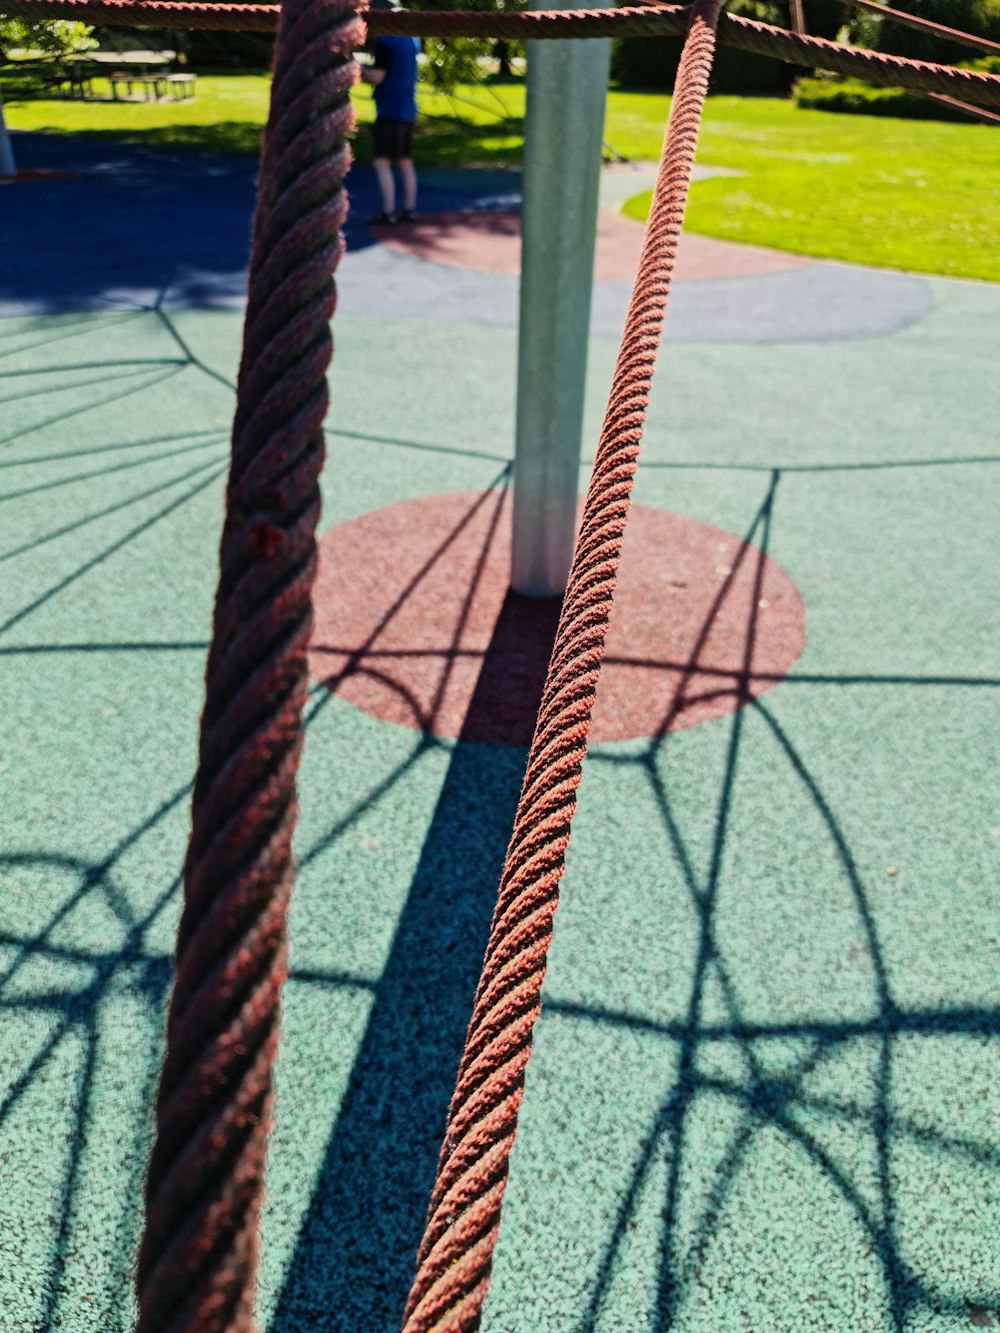 a close up of a rope on a playground